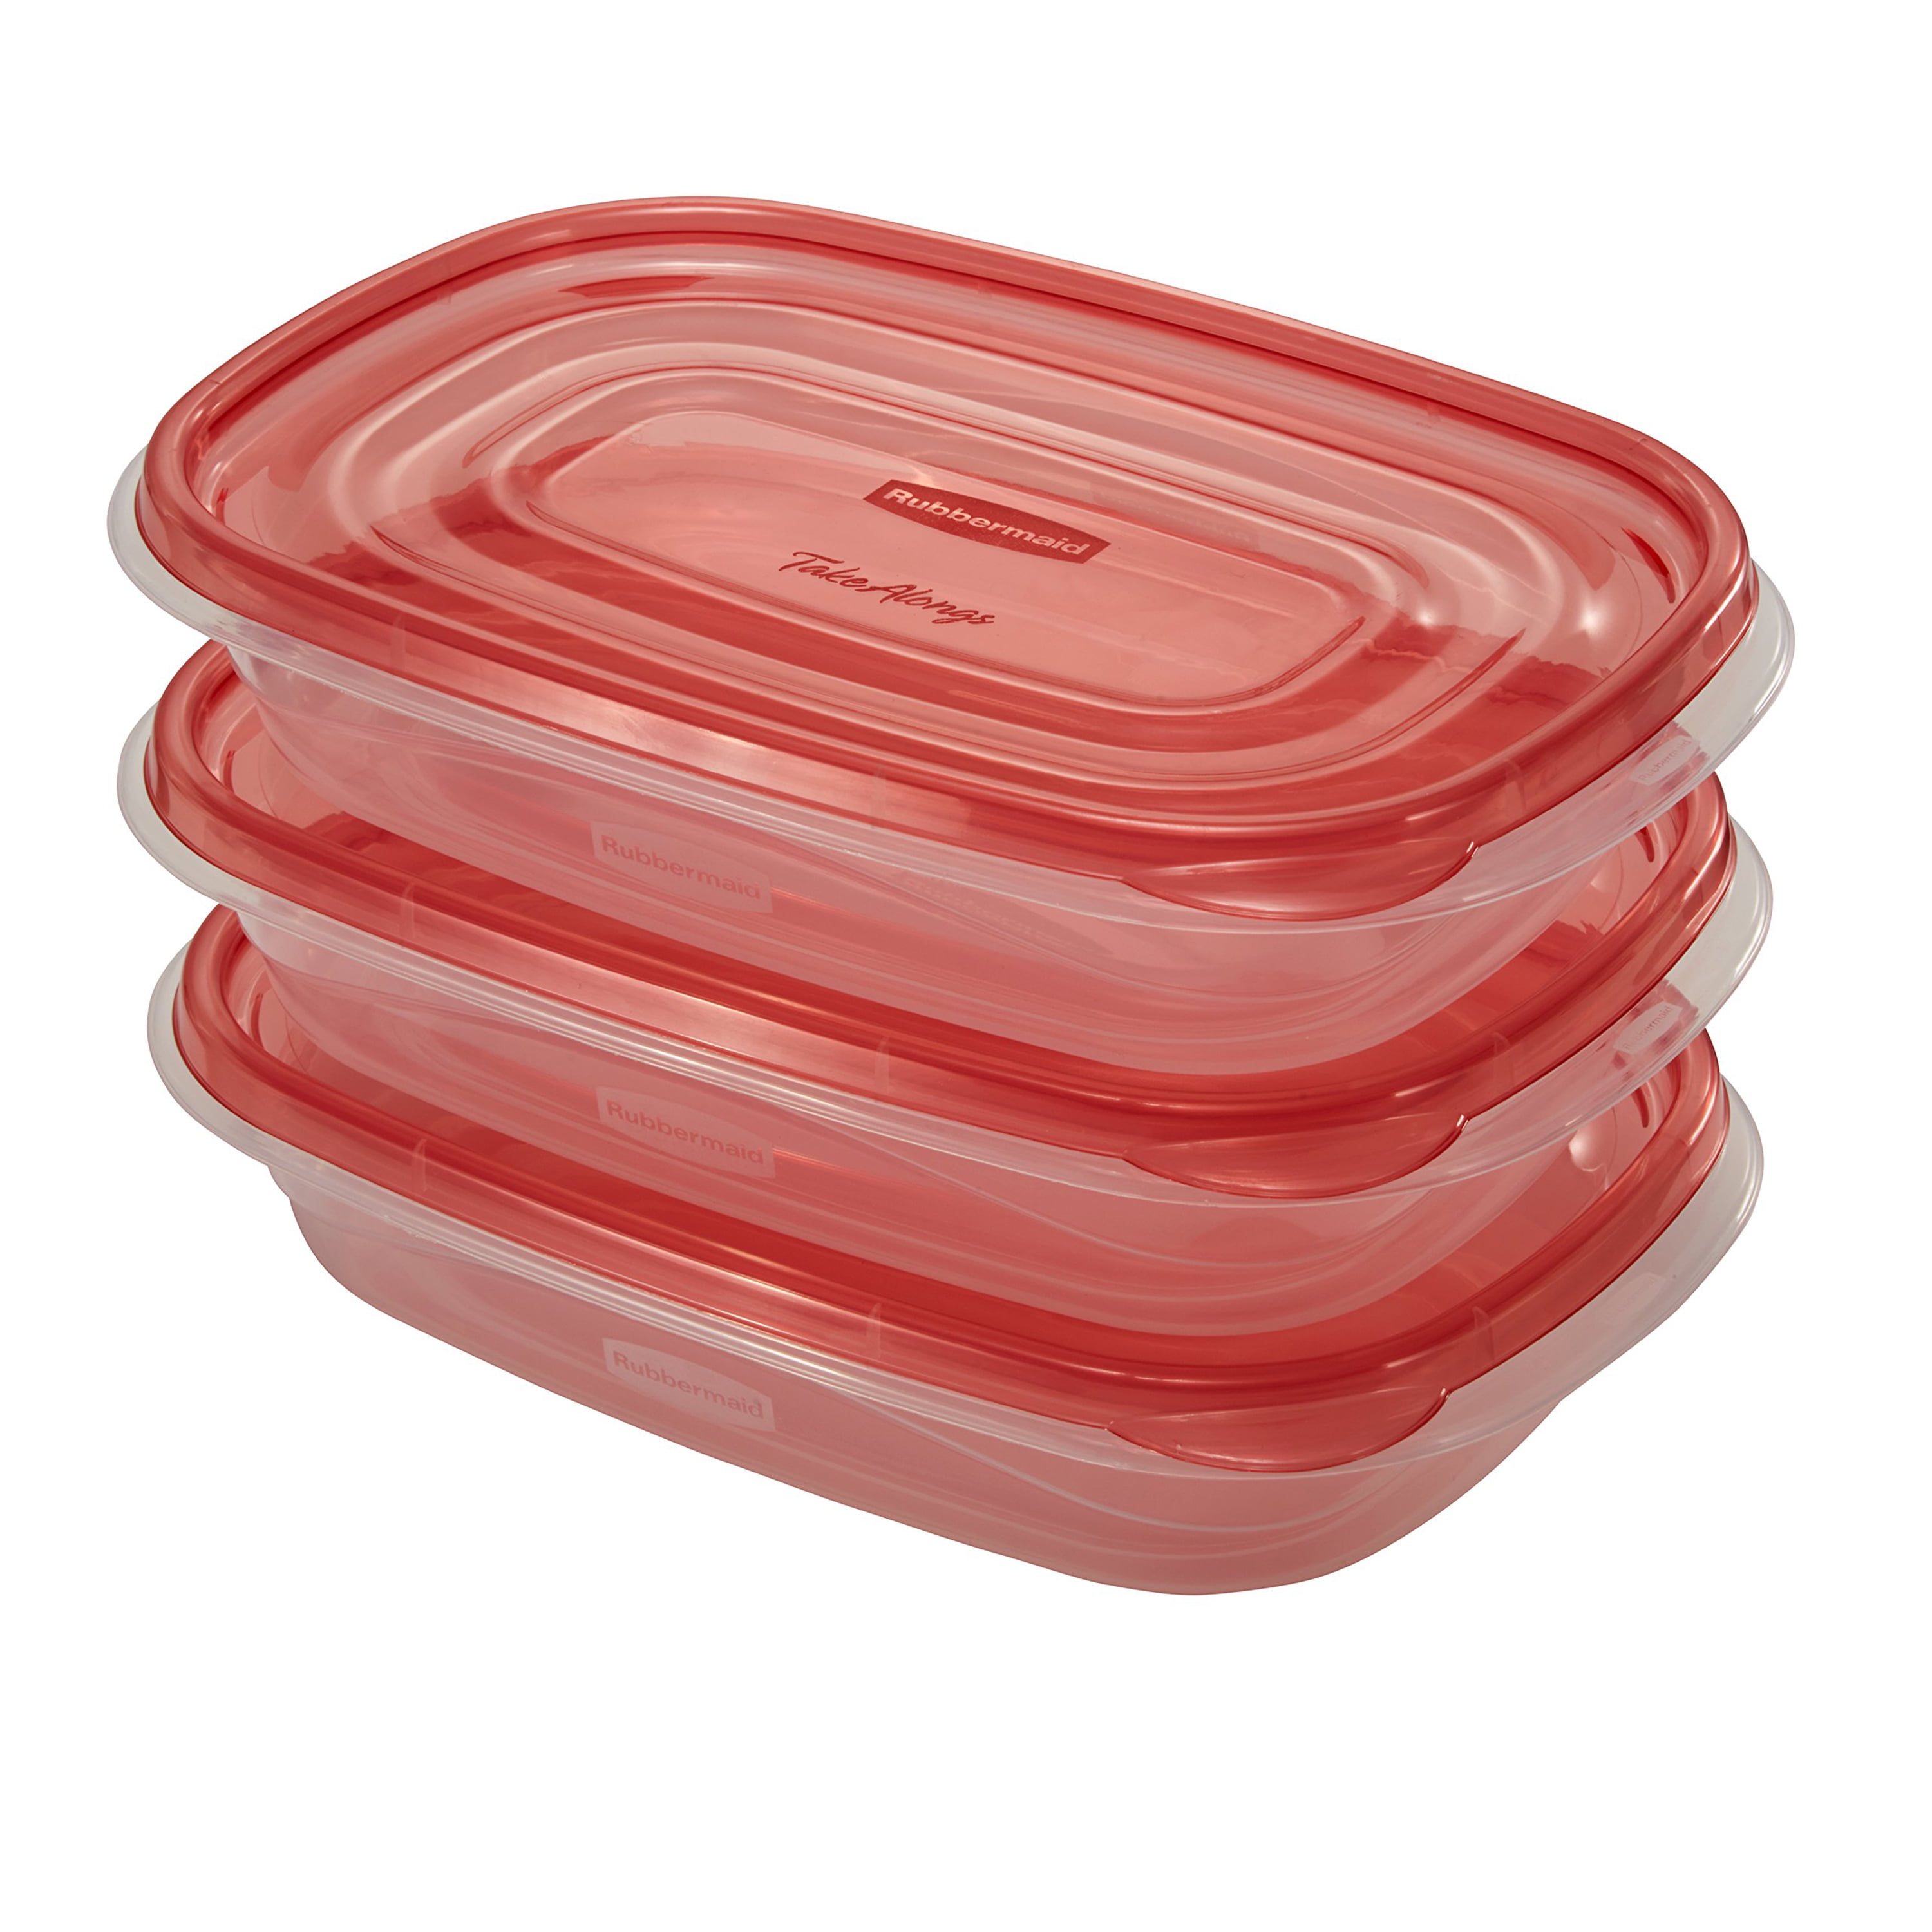 Rubbermaid® Take-Along® Holiday Rectangle Containers & Lids, 3 pk